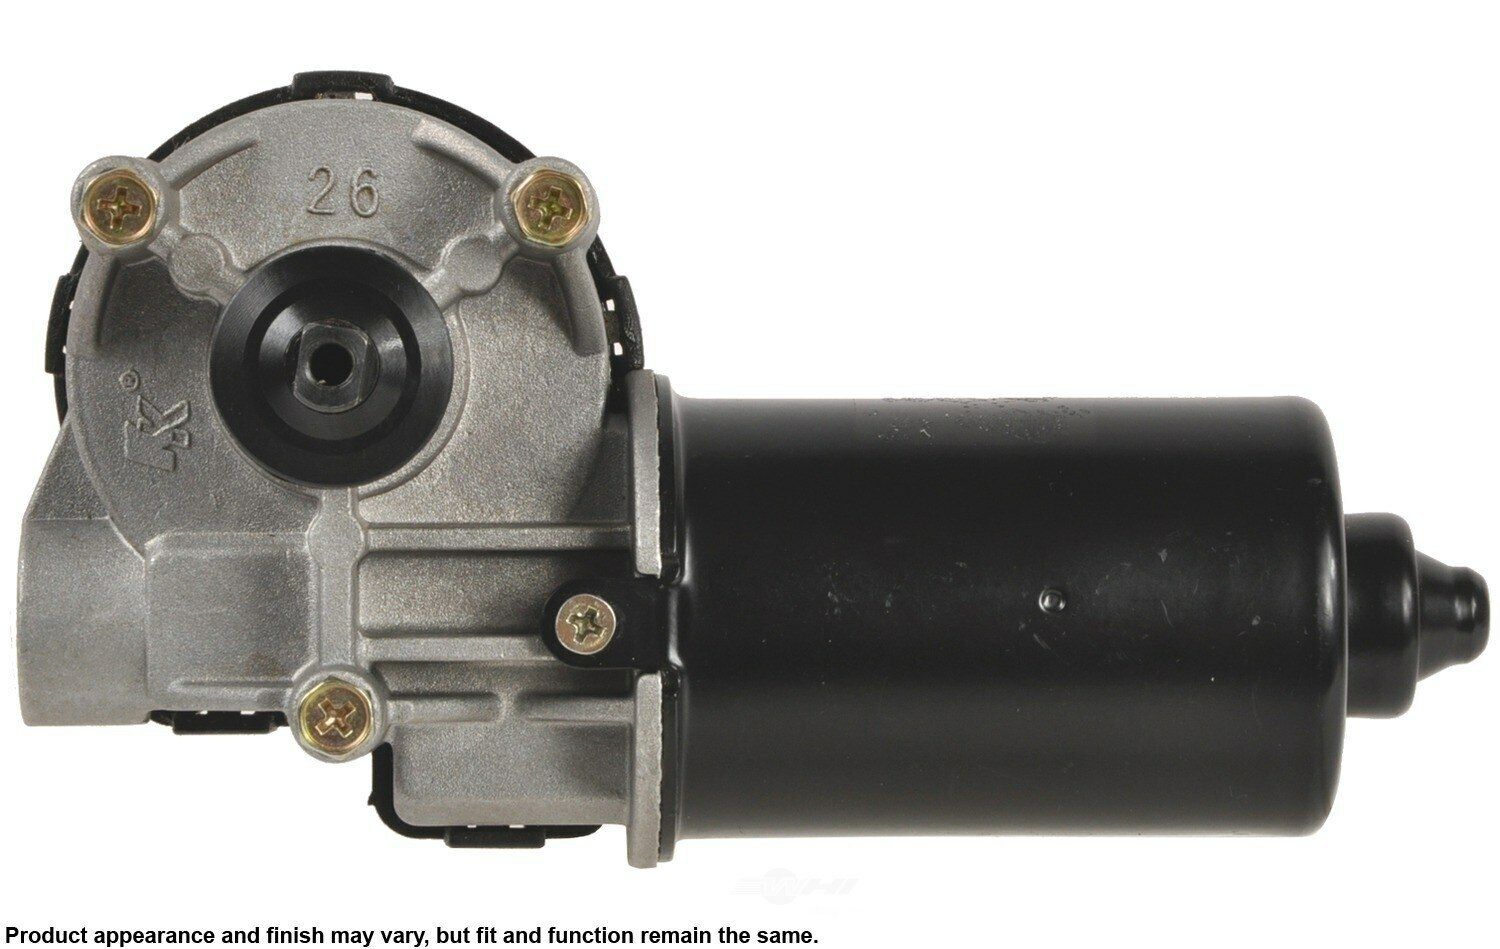 Ranking Super sale period limited TOP10 Windshield Wiper Motor Front 85-2004 Cardone